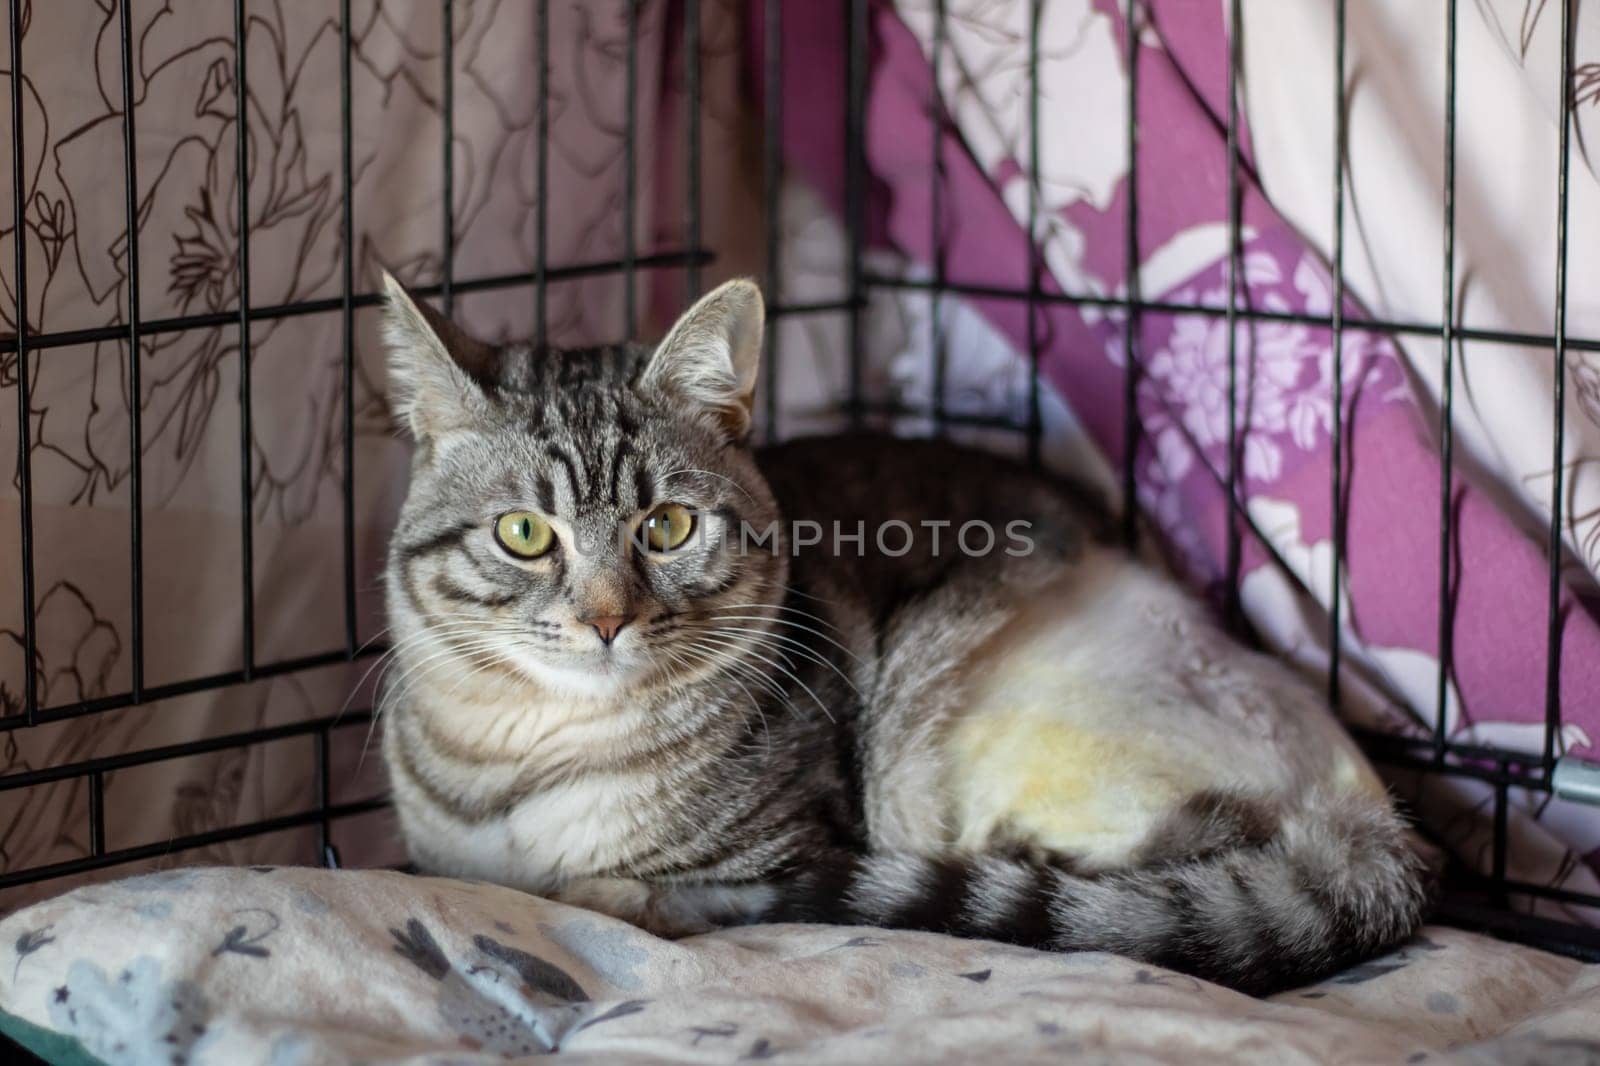 A small to mediumsized Felidae, a carnivorous terrestrial animal with whiskers, is resting inside a cage, gazing at the camera through the mesh fence